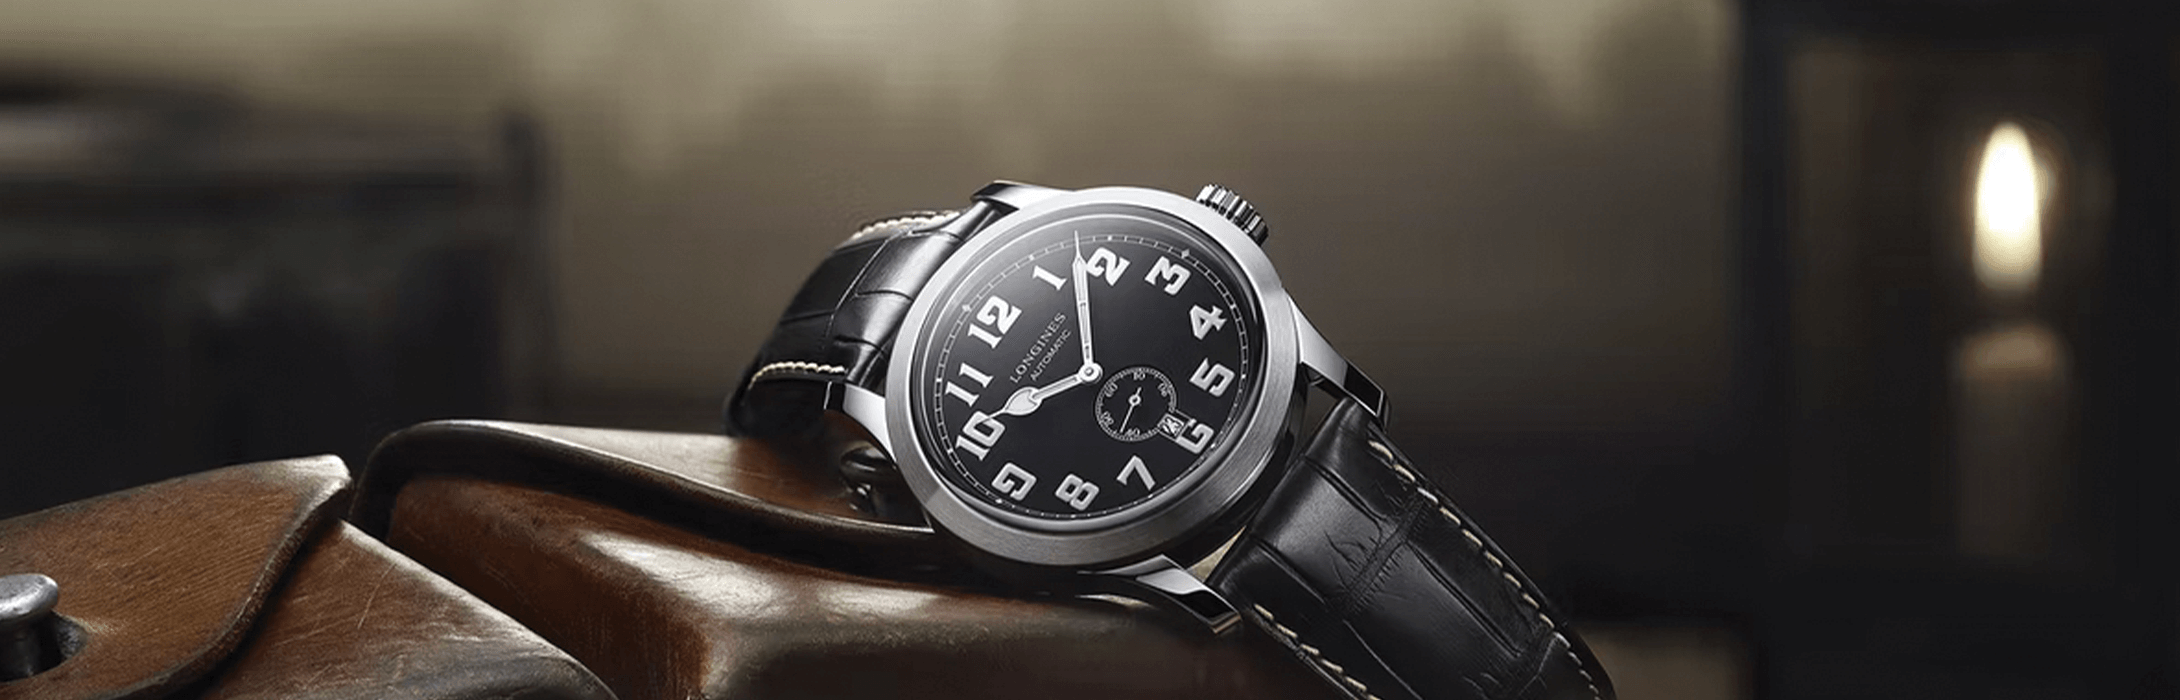 Longines Watches Ultimate Buying Guide - Watches